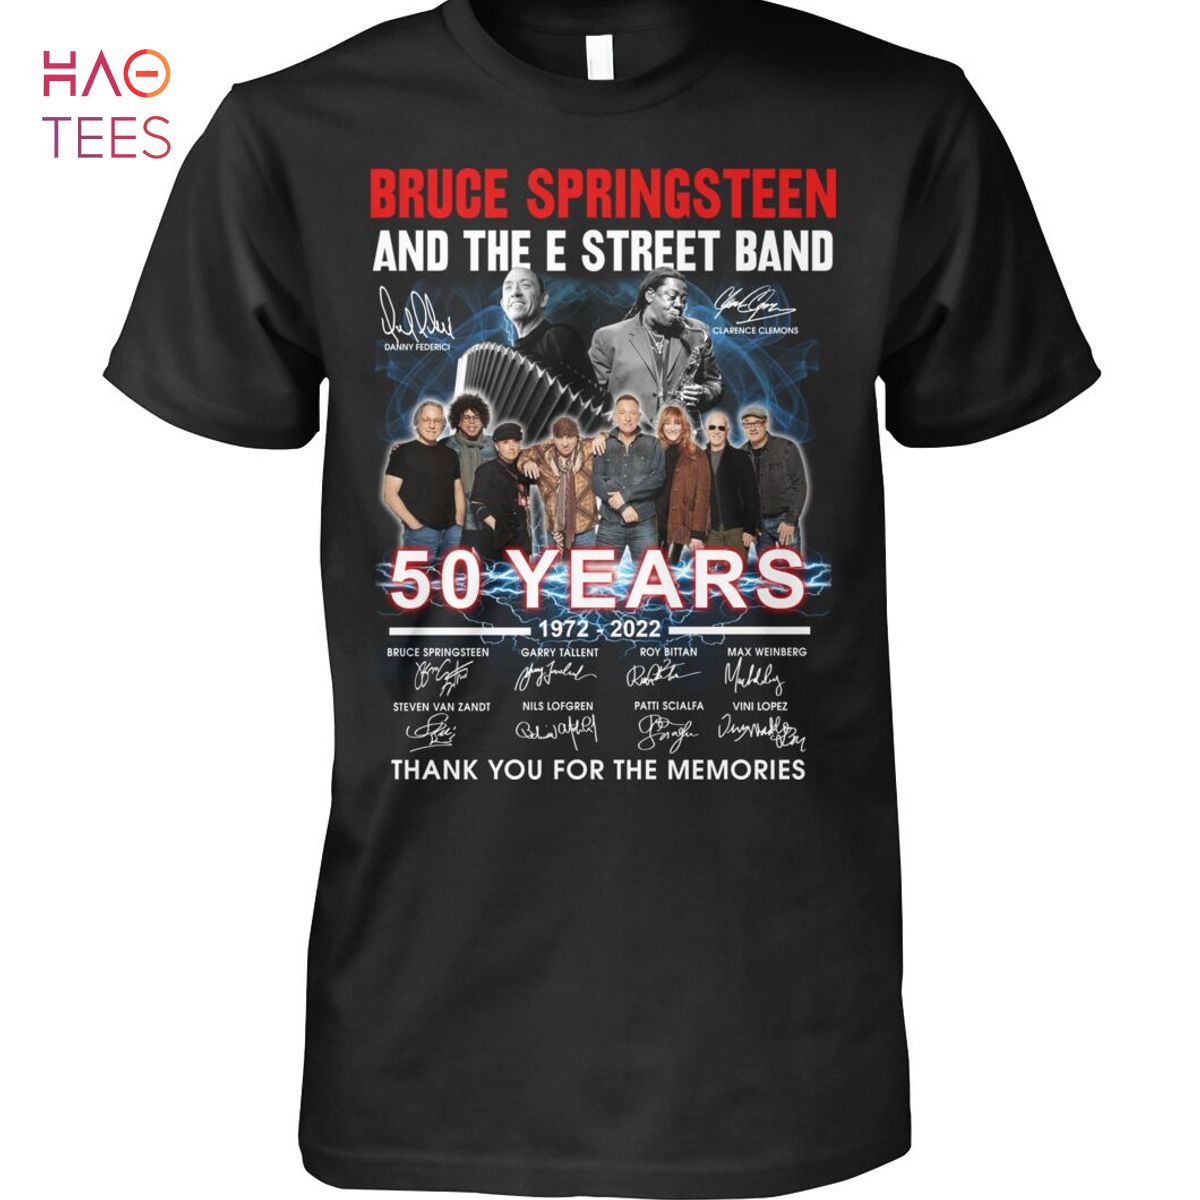 Bruge Springsteen And The E Street Band 50Years 1972-2022 Shirt